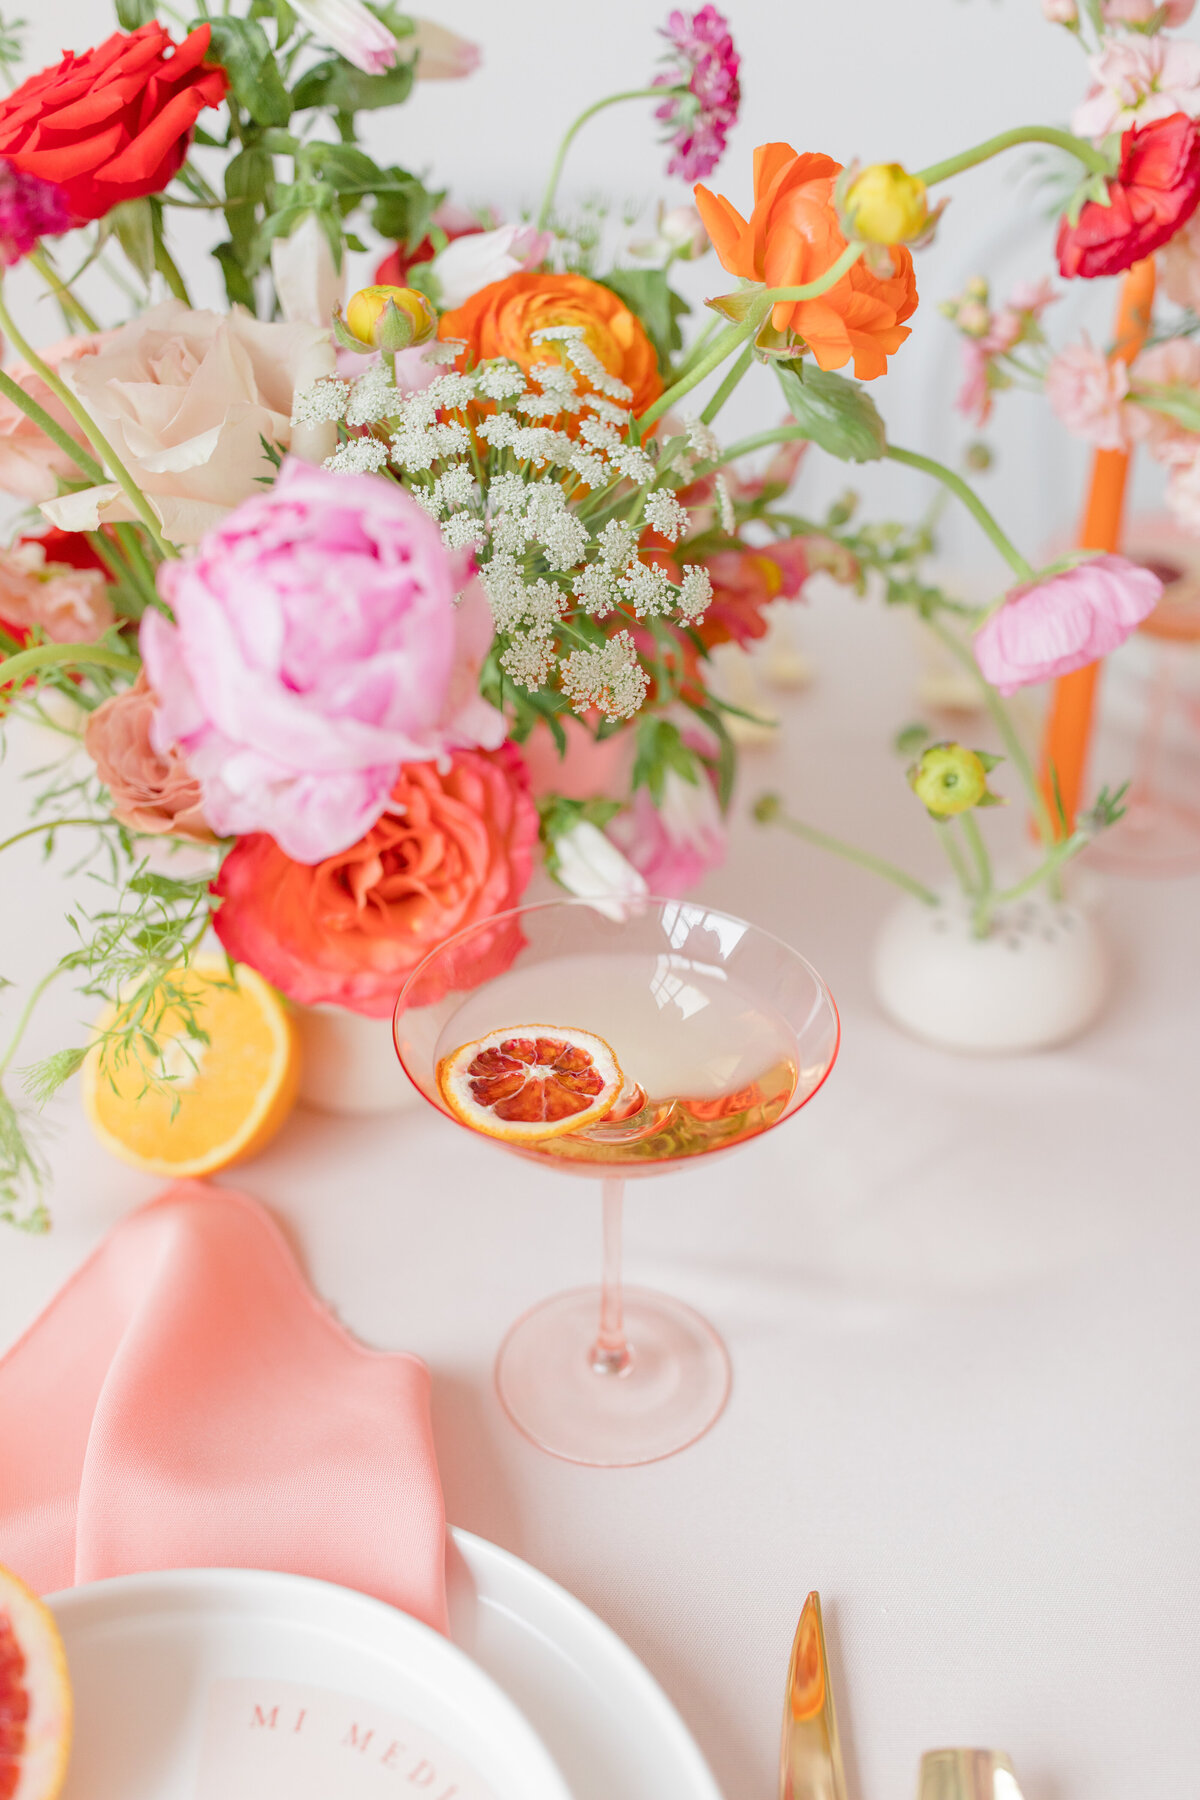 colorful place setting with blood orange and pink rose in a glass